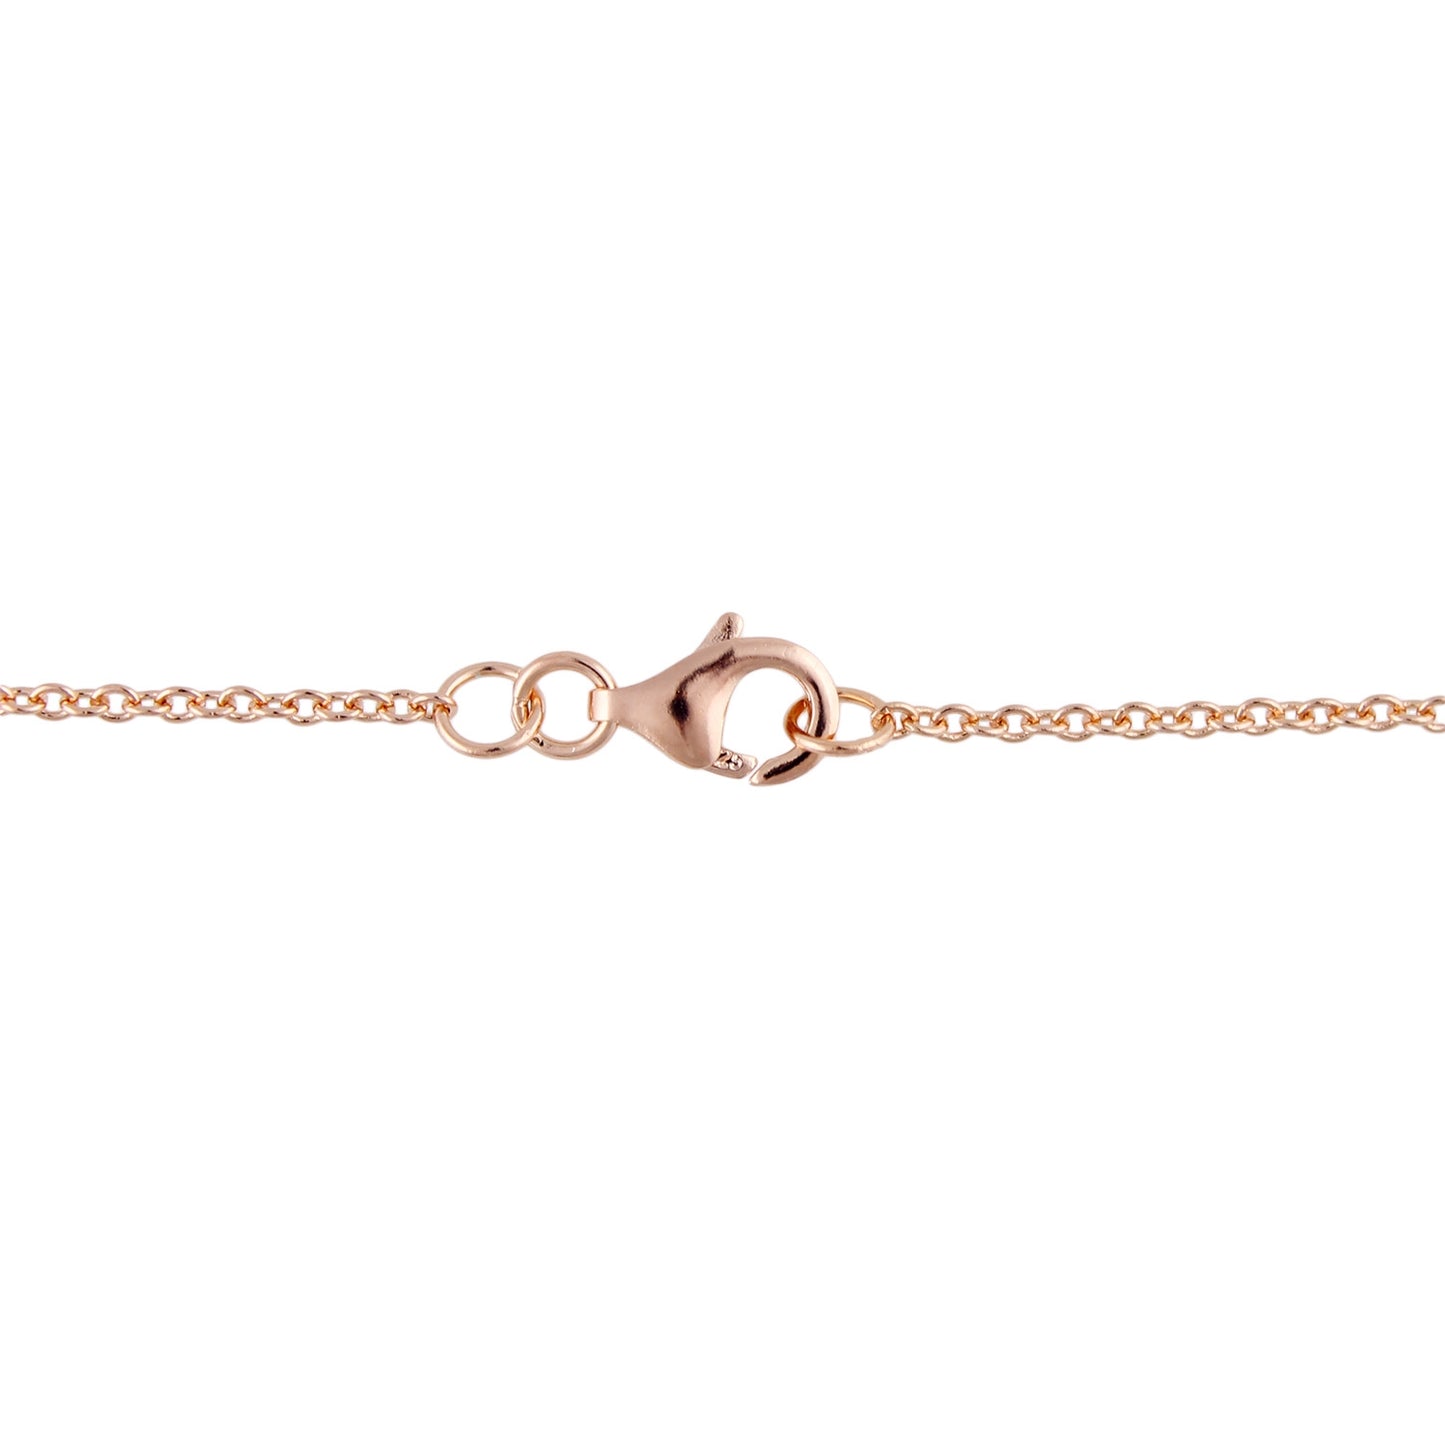 10k Rose Gold Morganite and Diamond Princess Diana Oval Halo Pendant Necklace (1/10cttw, H-I Color, I1-I2 Clarity), 18" - Pinctore